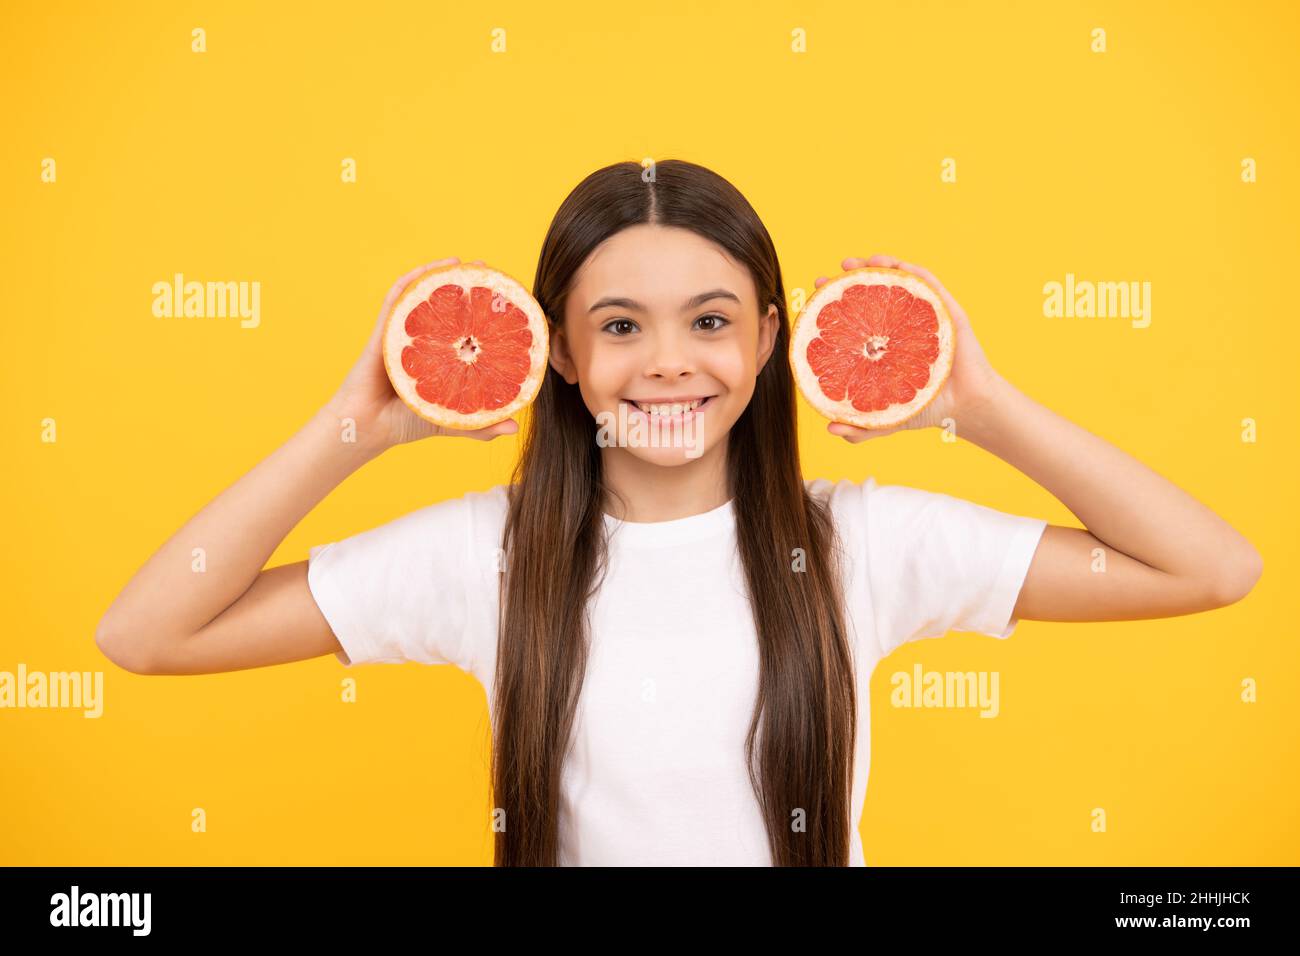 healthy life. diet and kid skin beauty. smiling teen girl with grapefruit. vitamin and dieting. Stock Photo